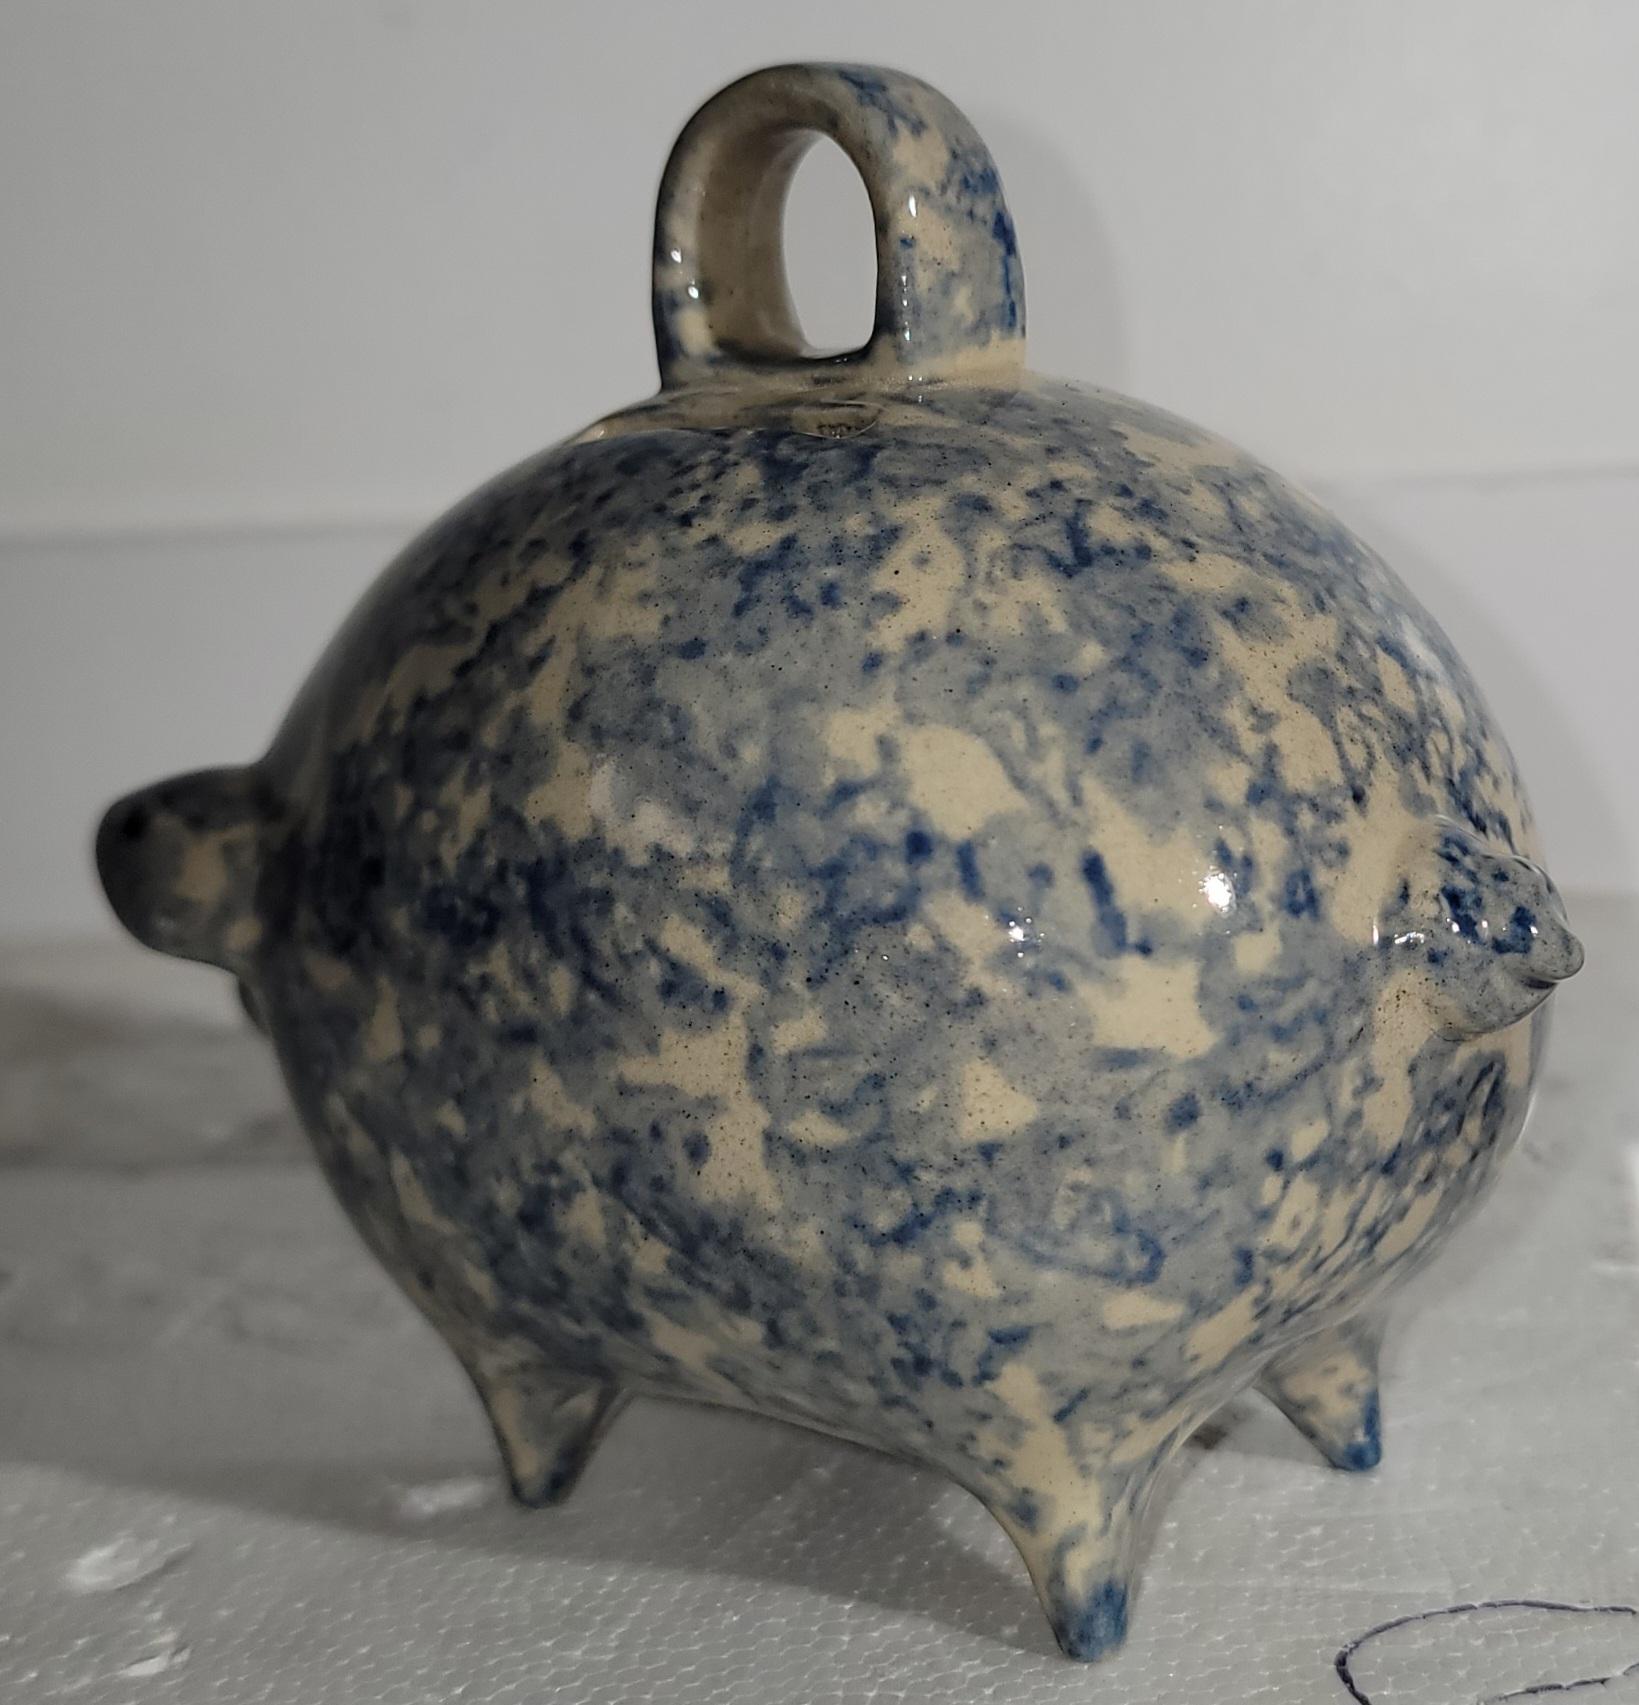 Antique sponge ware piggy bank in fine condition. Missing cork from base and in very good condition.